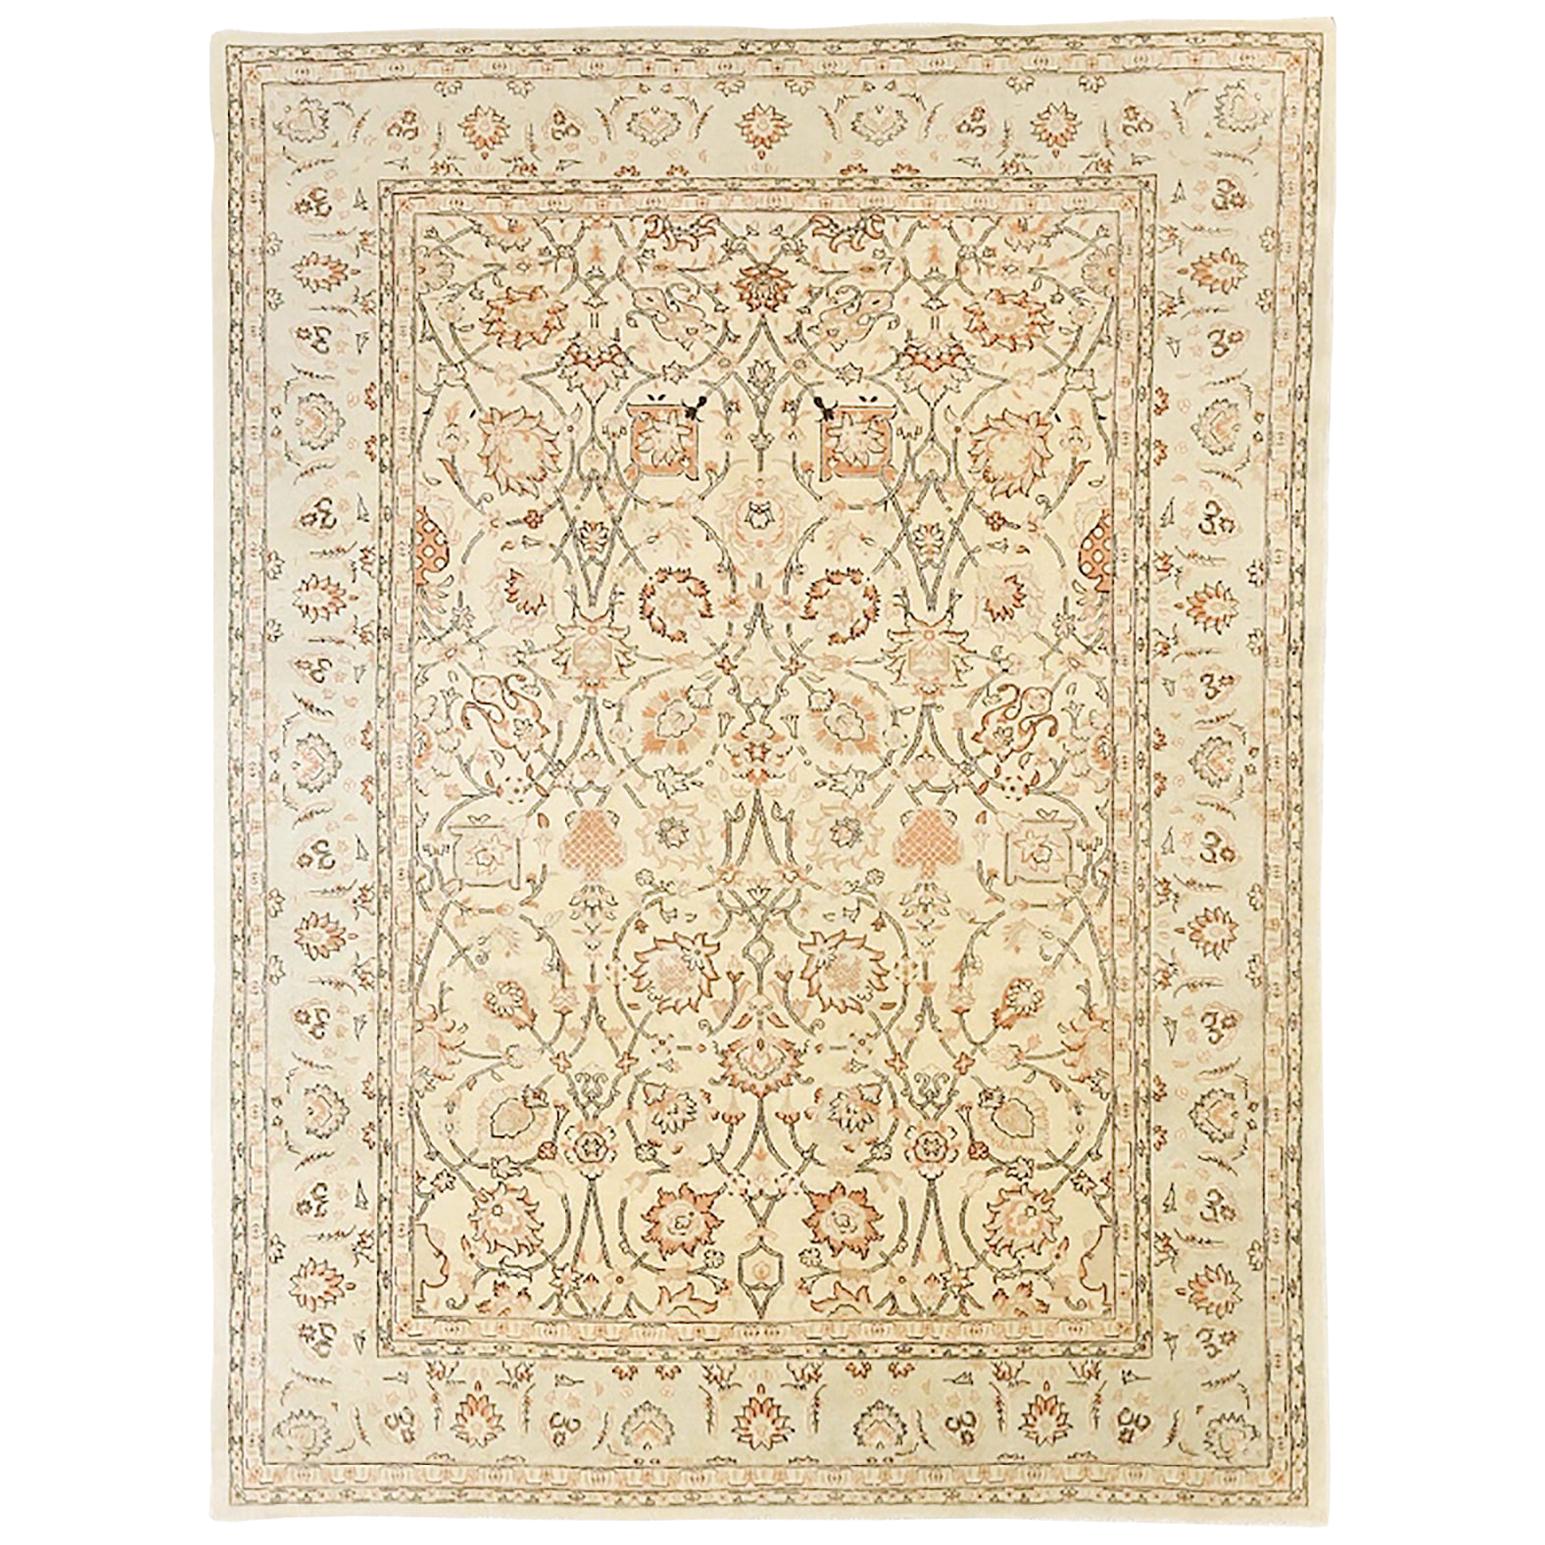 Antique Persian Tabriz Rug with Black and Beige Floral Details Over Ivory Field